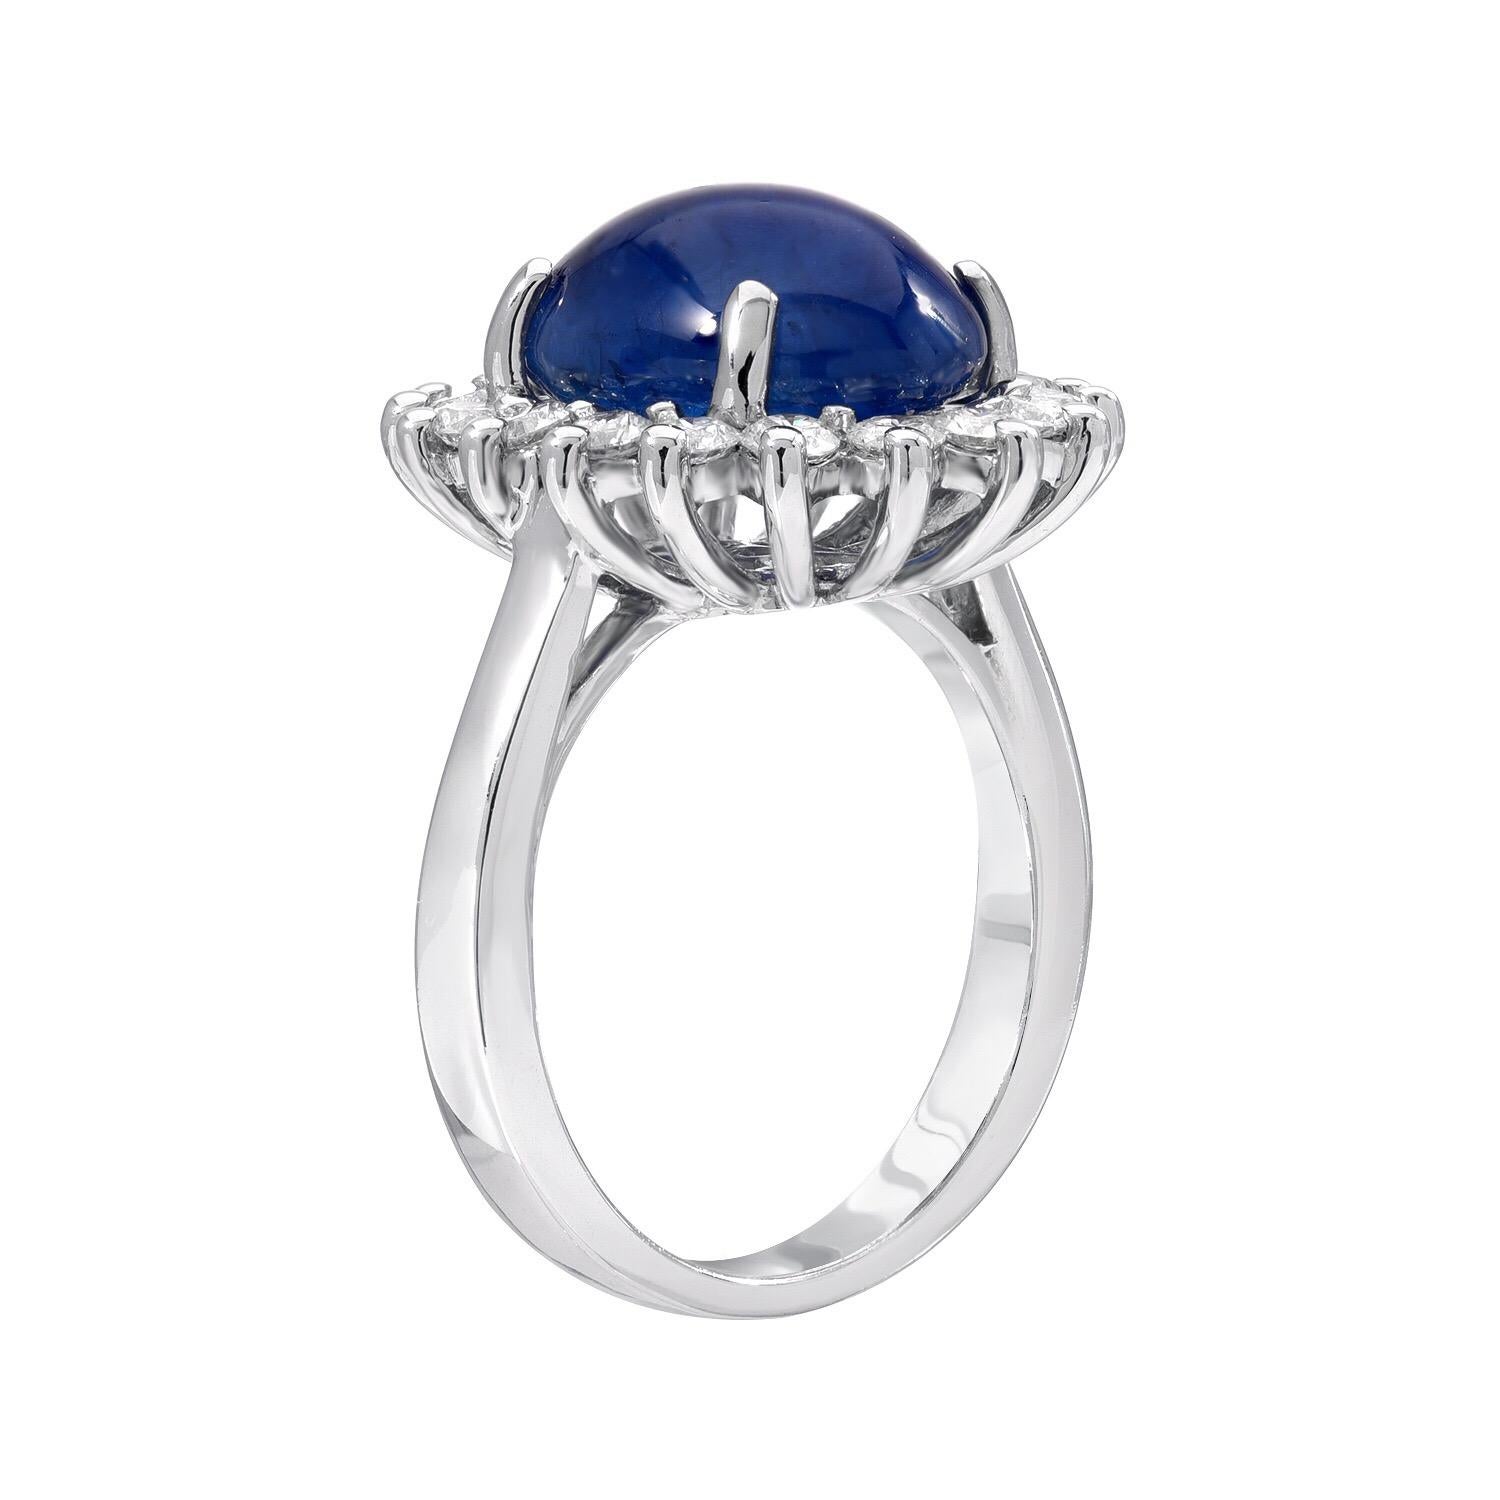 Sapphire ring featuring a blue Sapphire oval Cabochon, weighing a total of 8.97 carats, surrounded by a total of 1.04 carats of round brilliant diamonds, in 18K white gold.
Size 6.75. Re-sizing is complimentary upon request.
Returns are accepted and